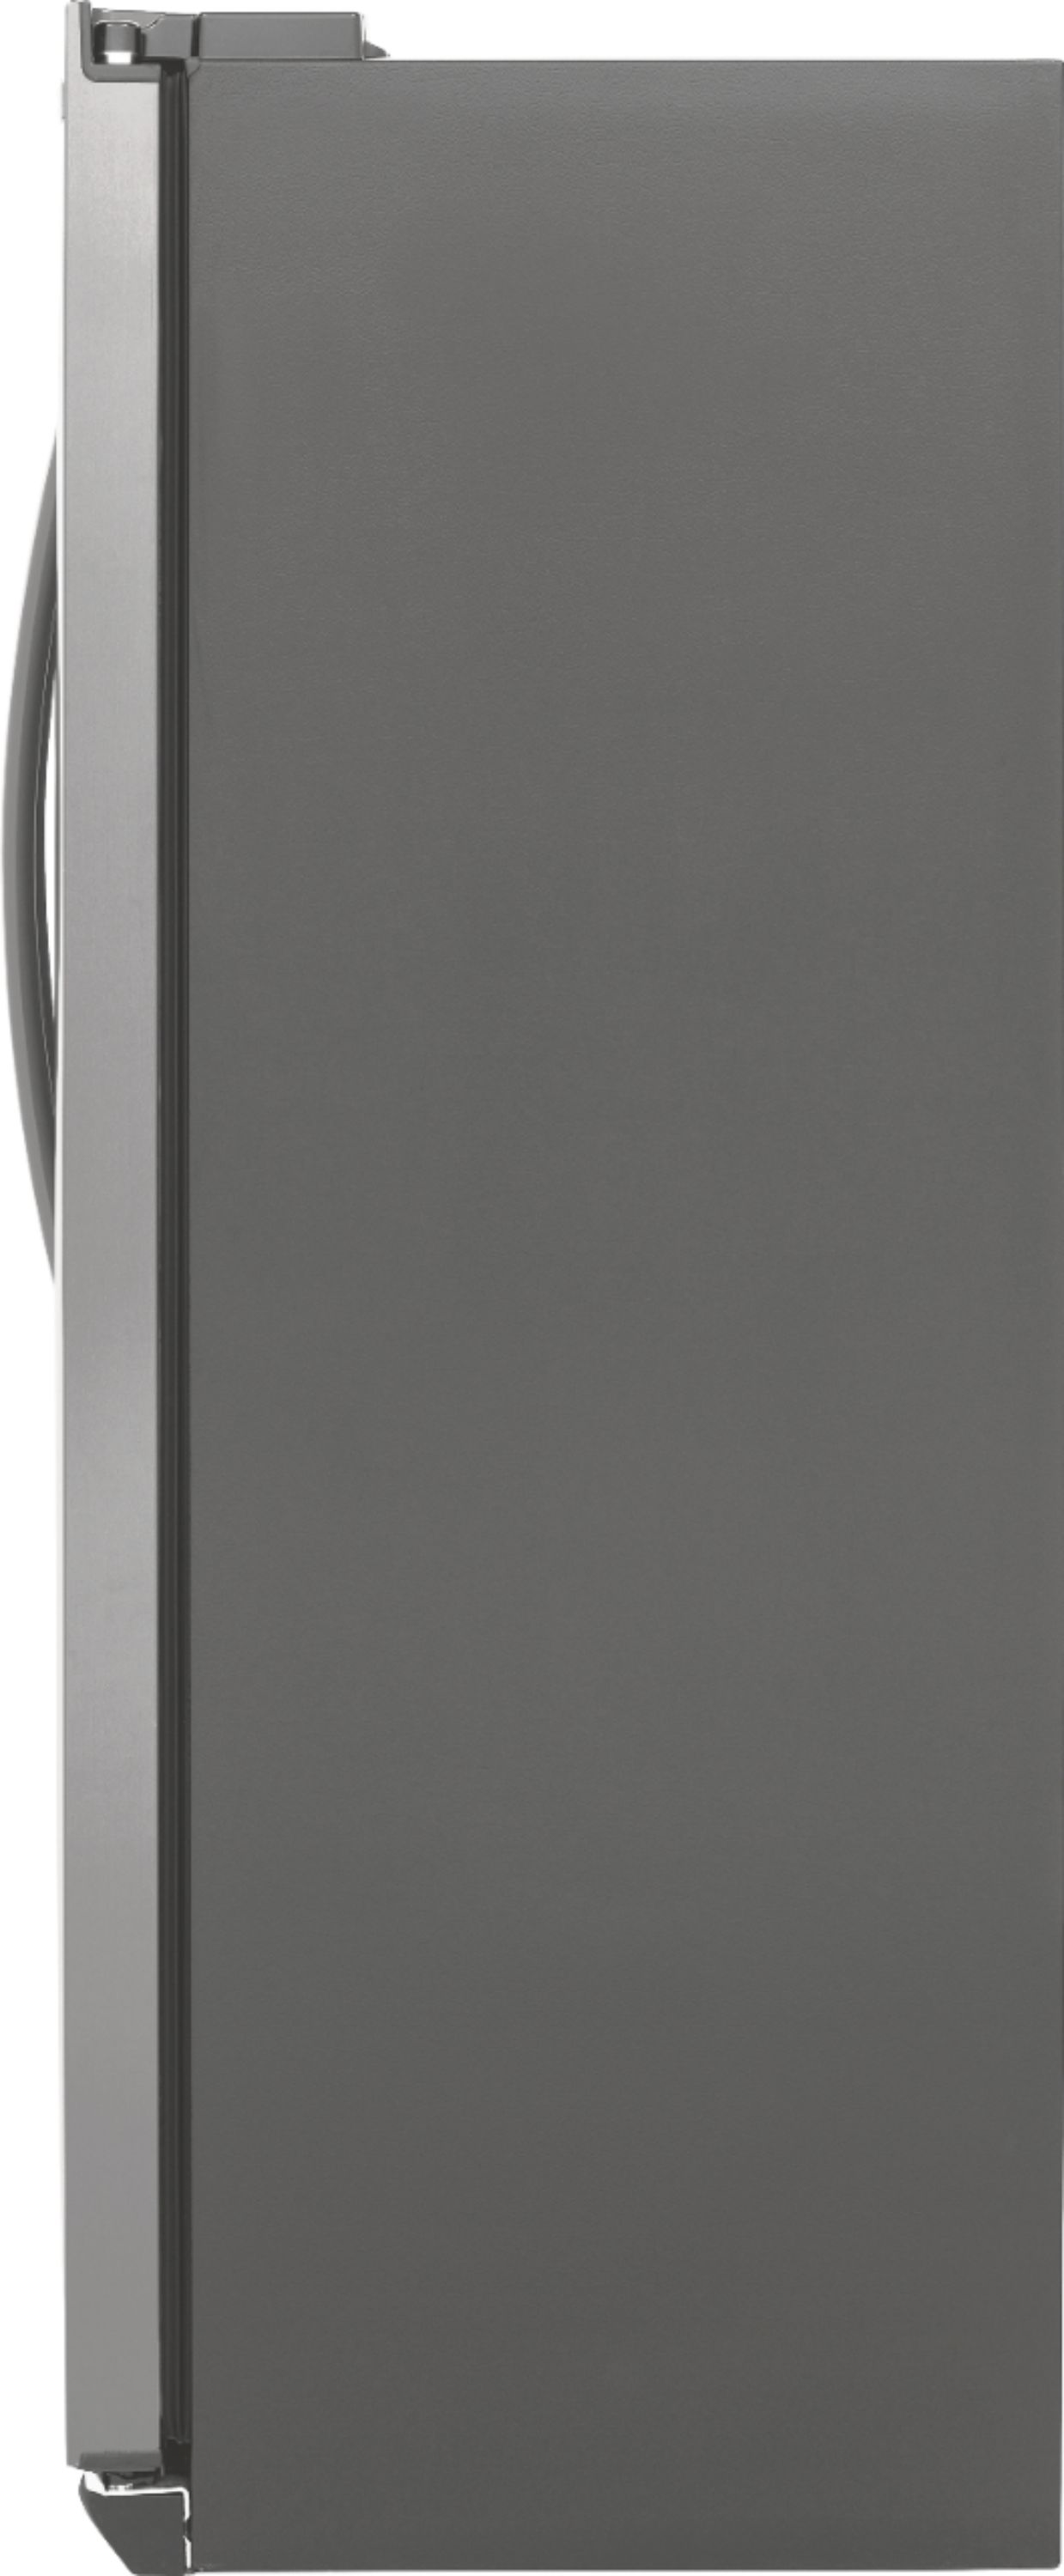 Frigidaire Gallery Series 33 in. 22.3 cu. ft. Side-by-Side